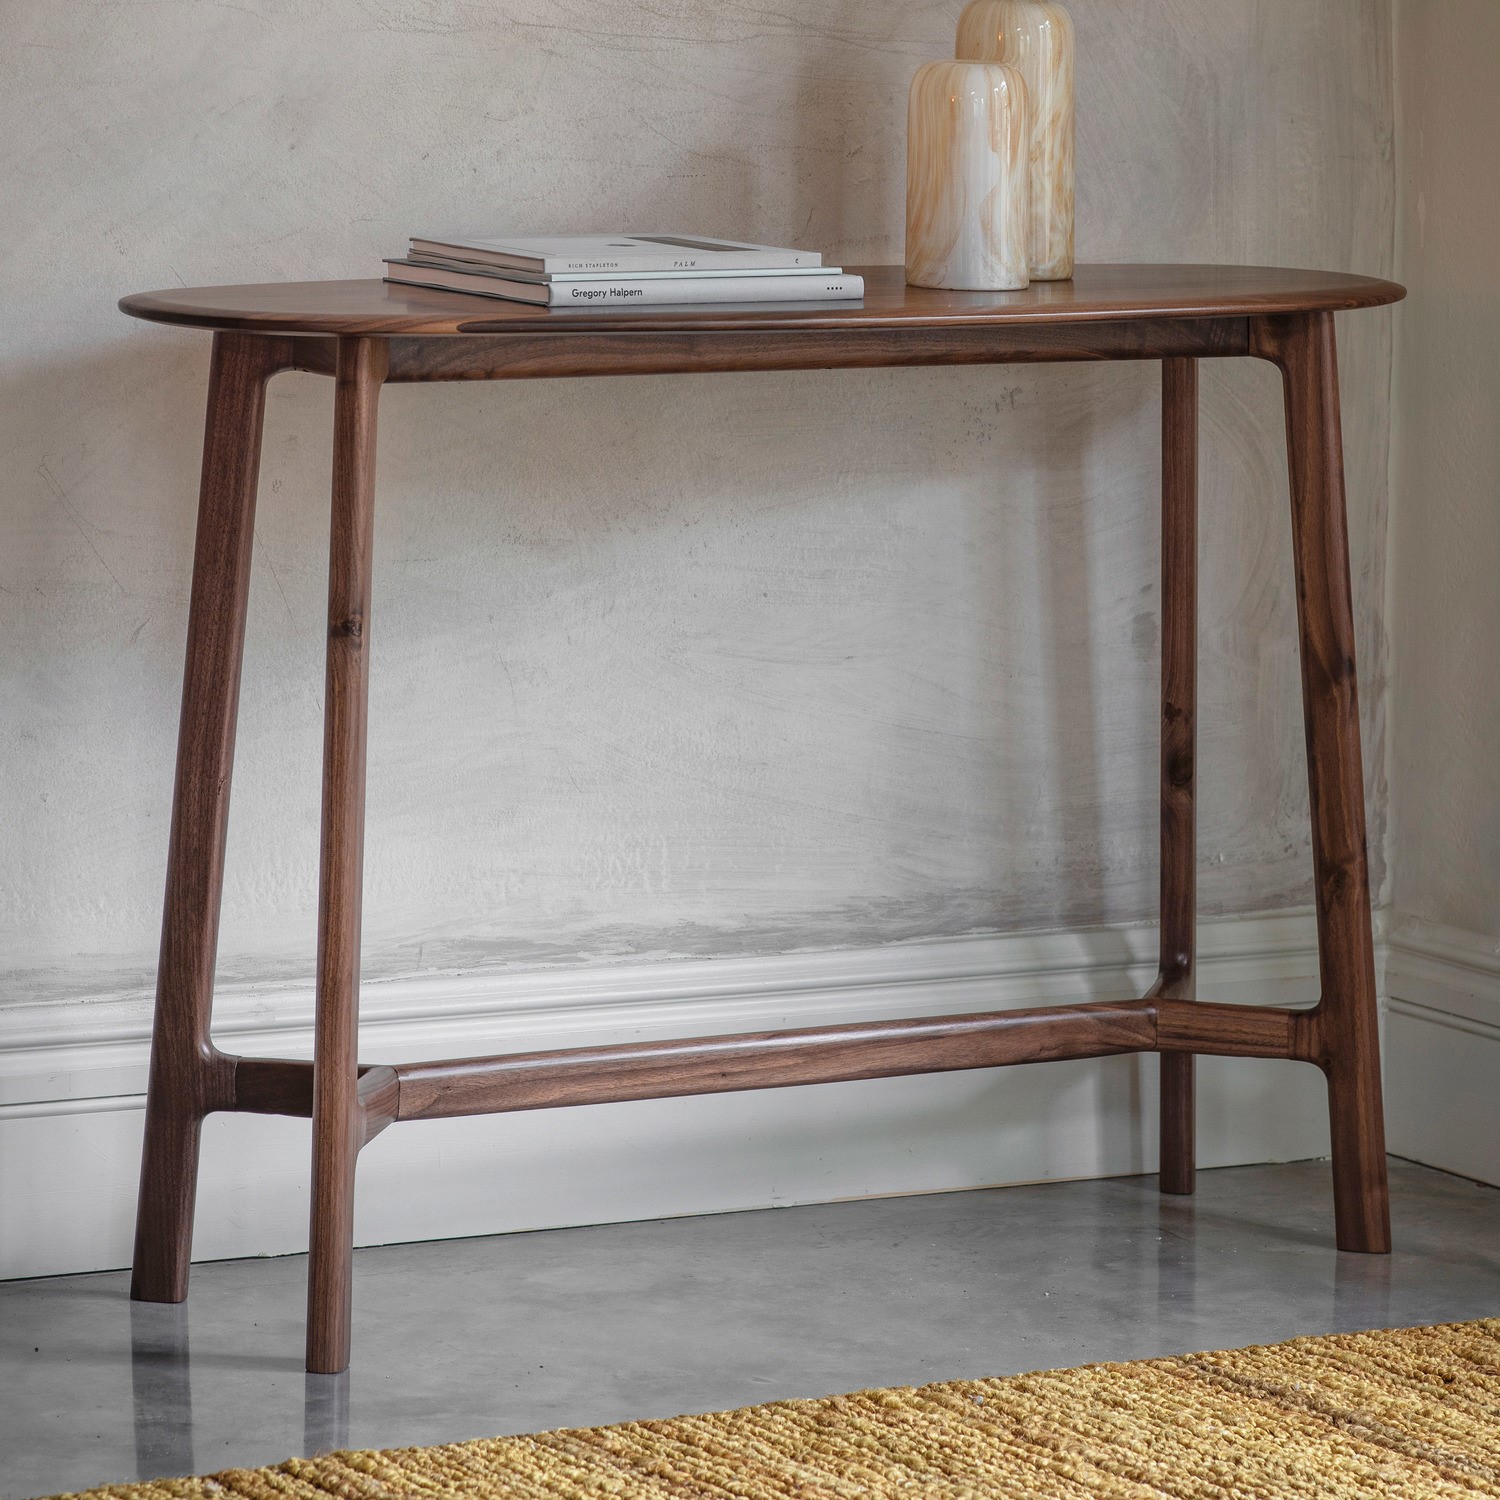 Read more about Madrid console table walnut caspian house